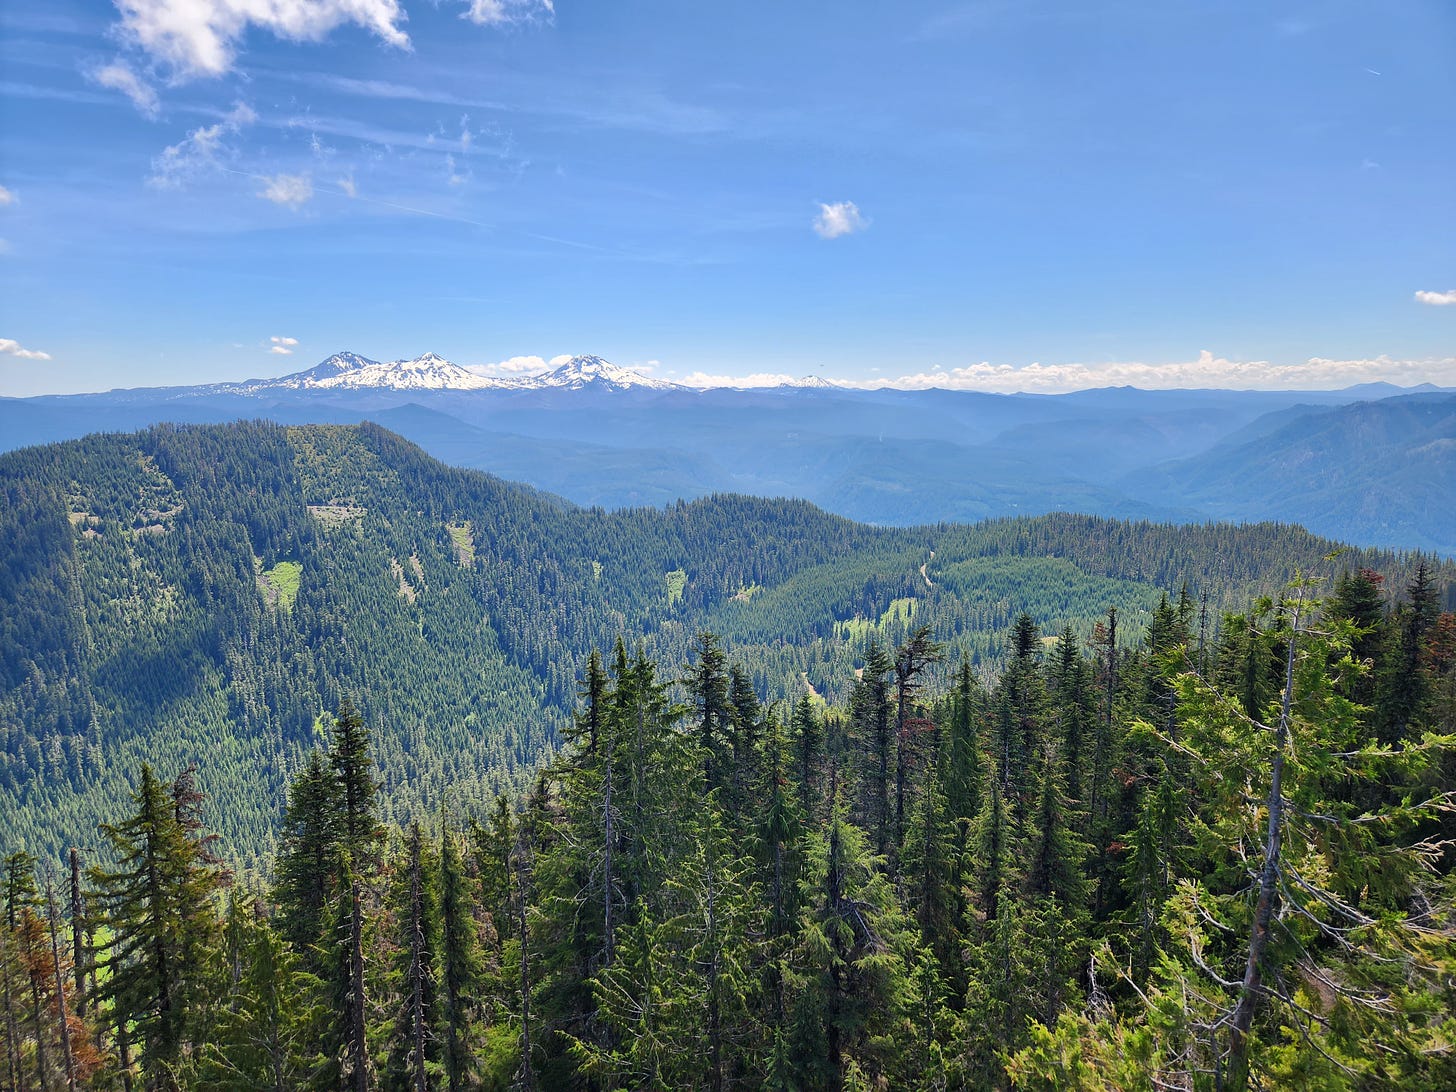 landscape view from ridge across forested valley with mountains in background